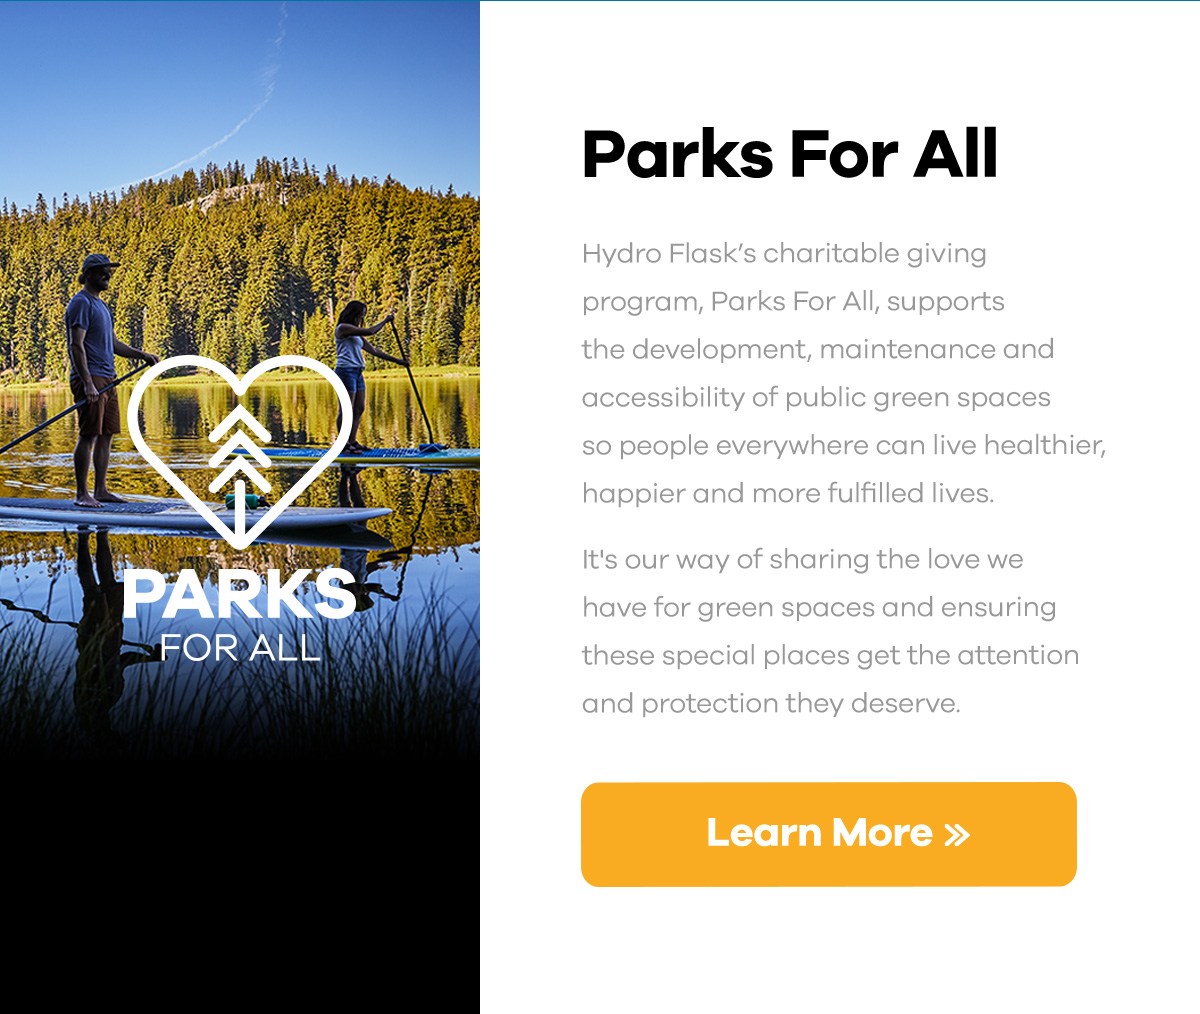 Parks For All - Hydro Flask''s charitable giving program, Parks For All, supports the development, maintenance and accessibility of public green spaces so people everywhere can live healthier, happier and more fulfilled lives. It''s our way of sharing the love we have for green spaces and ensuring these special places get the attention and protection they deserve. | Learn More >>